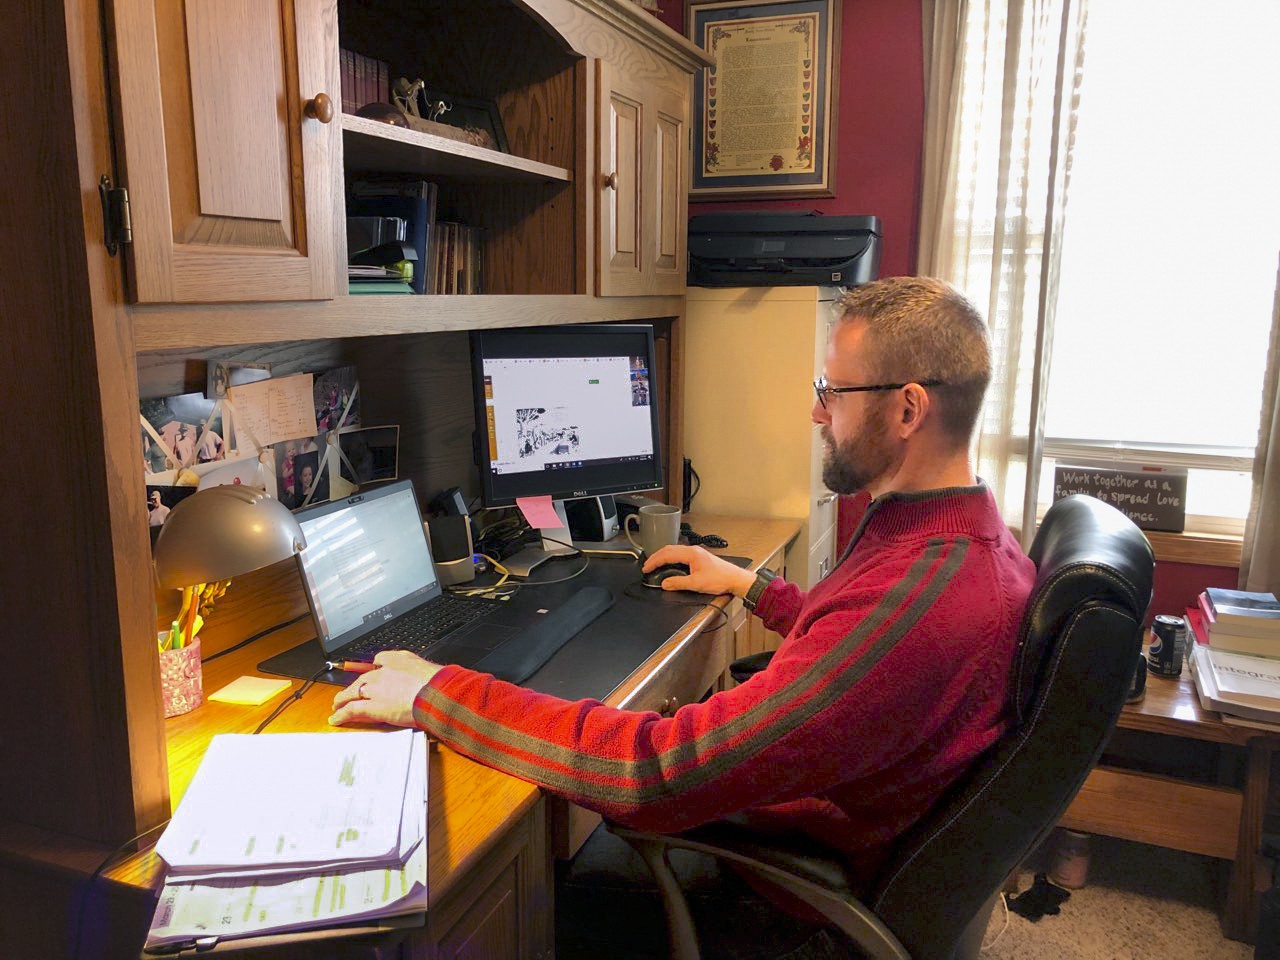 A BGSU assistant professor takes part in distance learning 